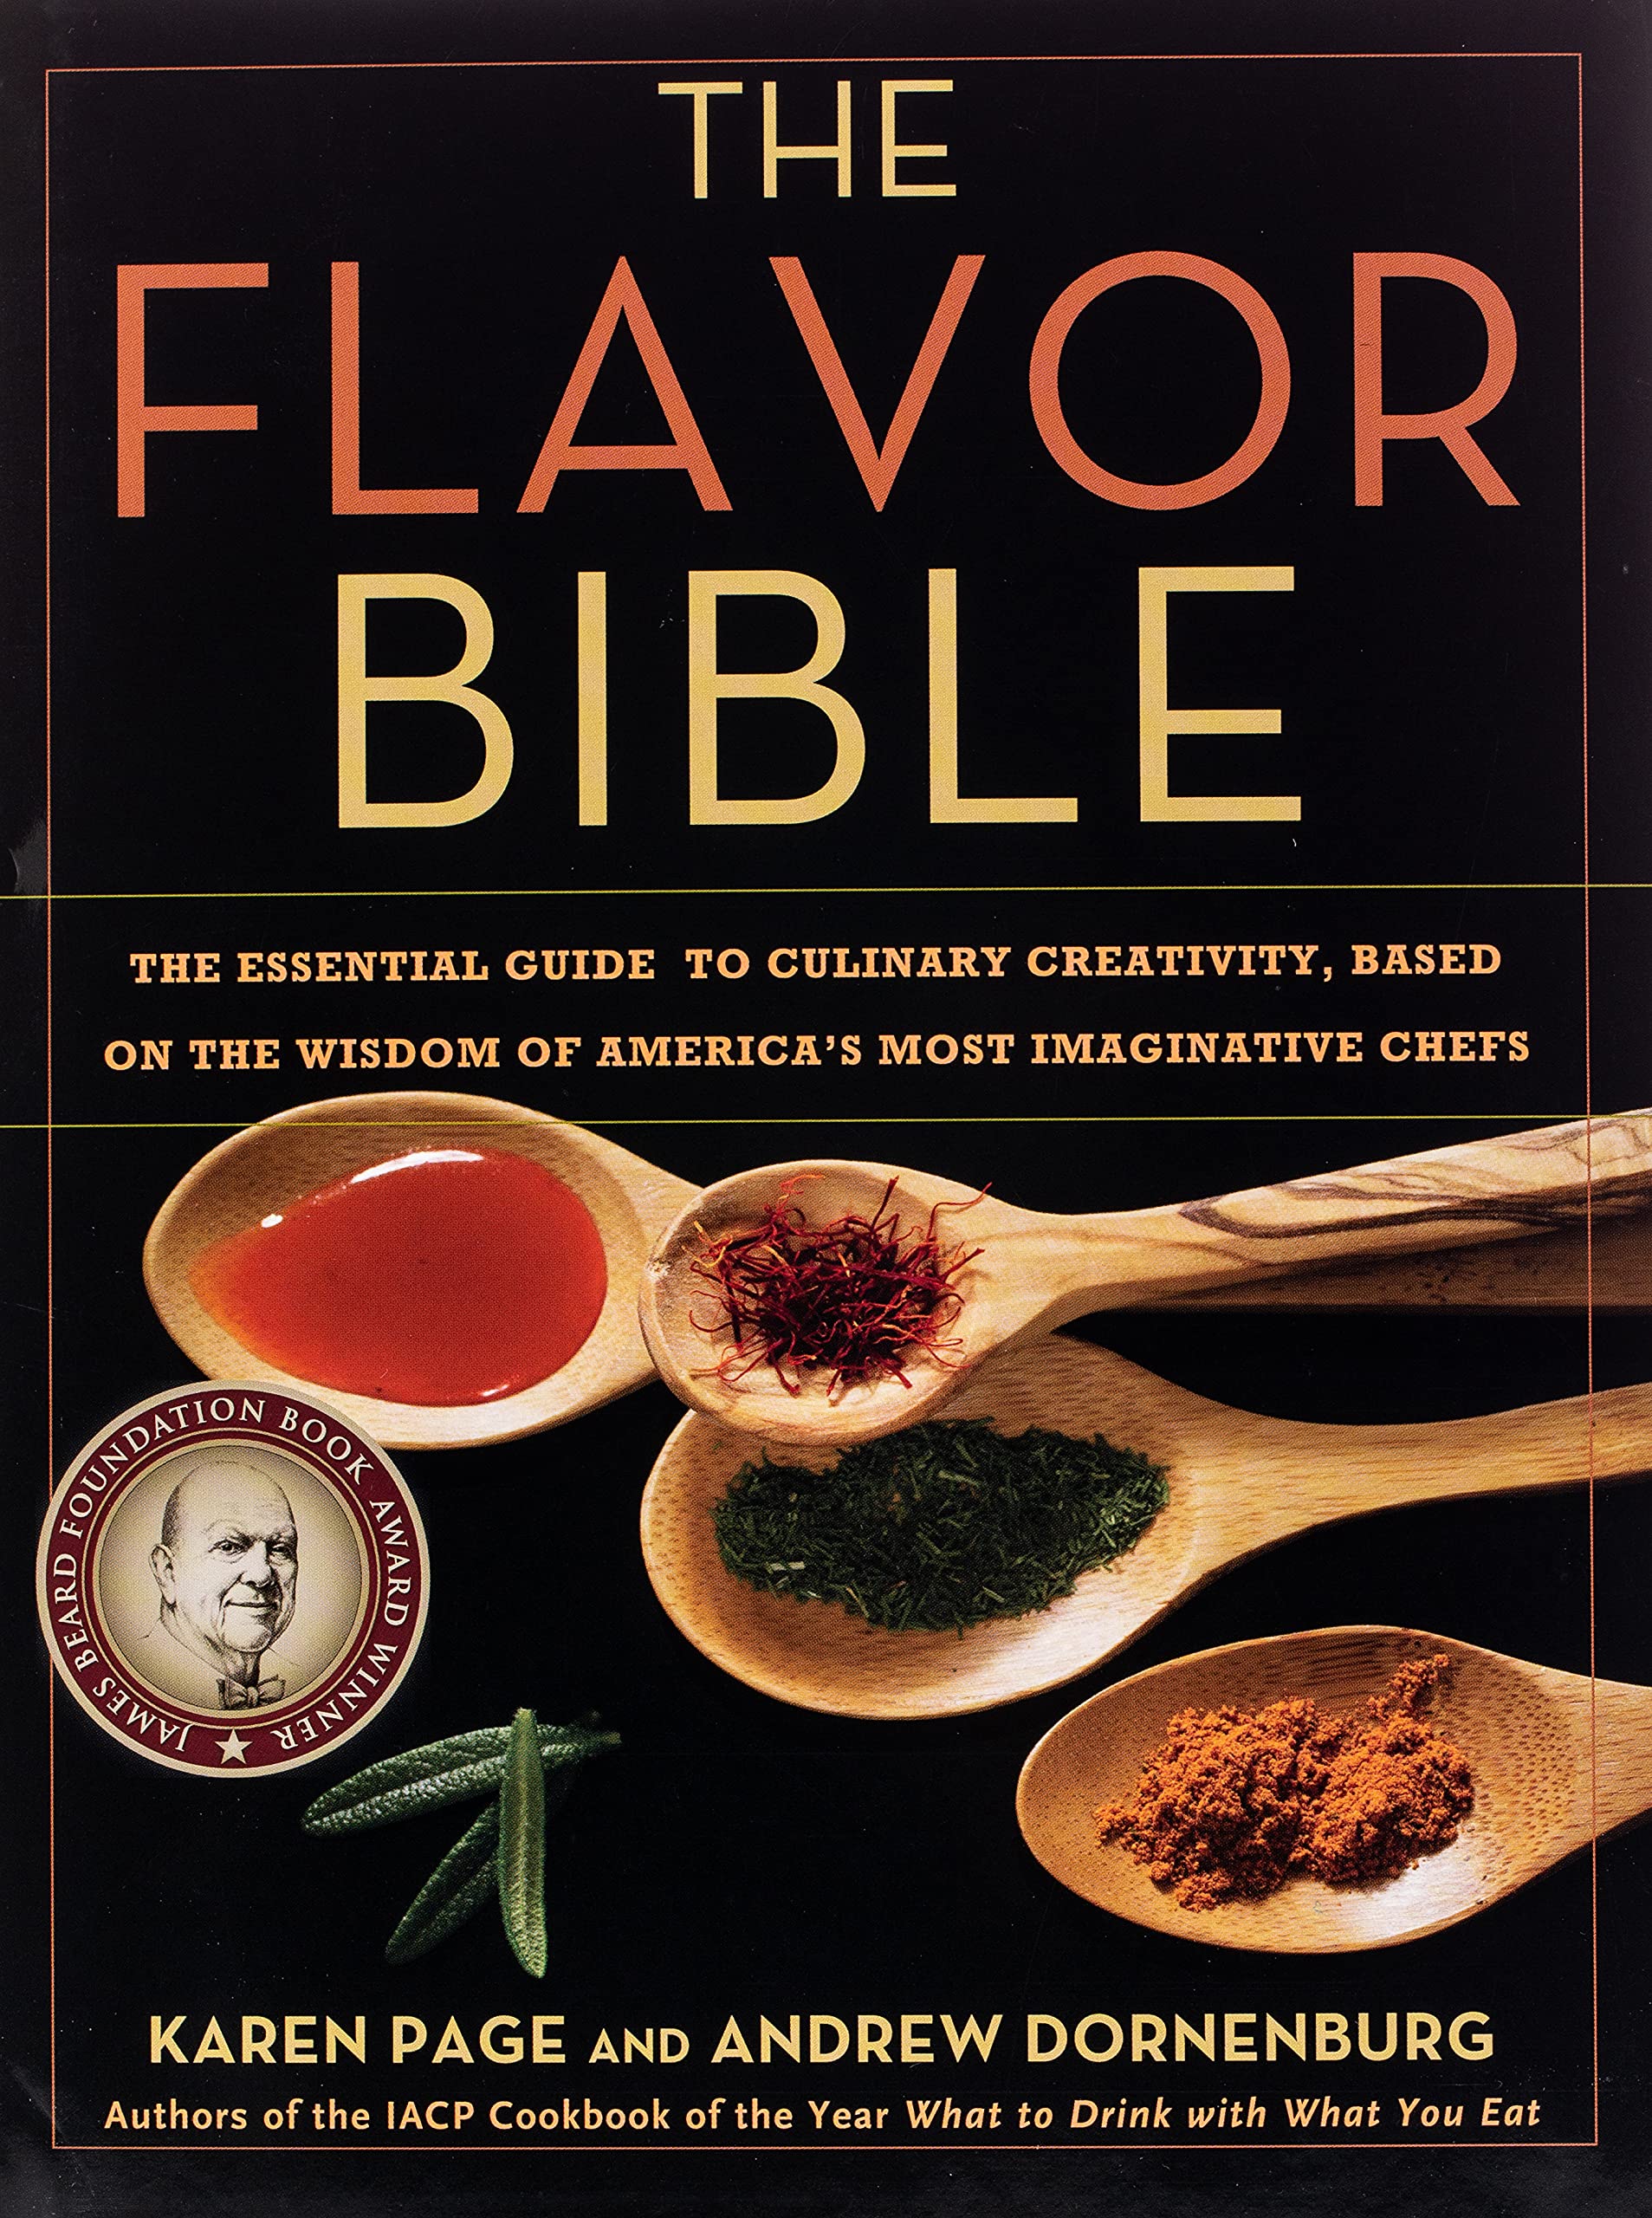 The Flavor Bible: The Essential Guide to Culinary Creativity, Based on the Wisdom of Americas Most Imaginative Chefs (Hardcover)